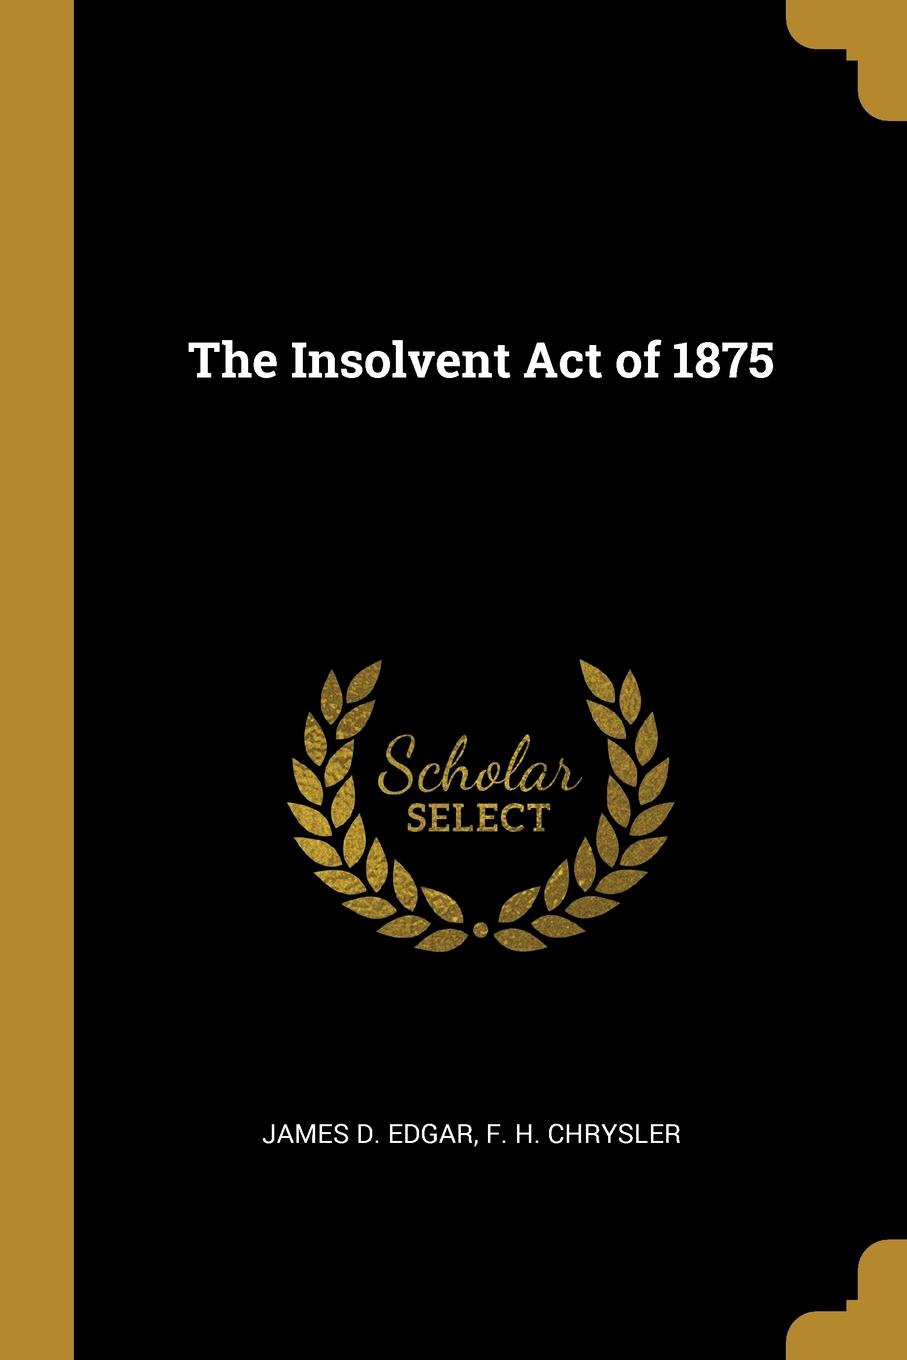 The Insolvent Act of 1875